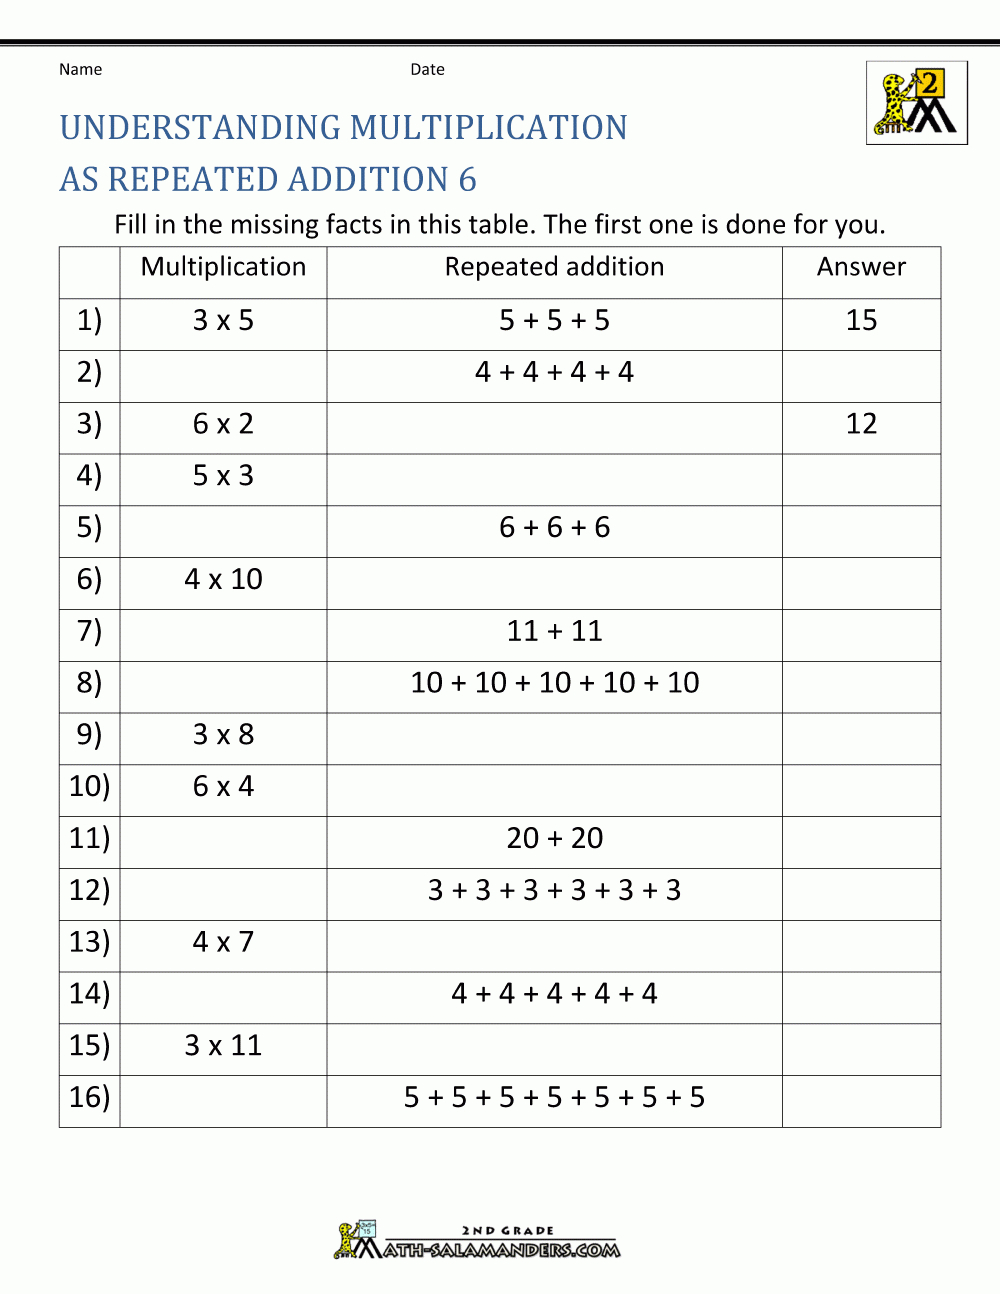 Multiplication Table Worksheets Understanding Multiplication pertaining to Multiplication Worksheets Repeated Addition